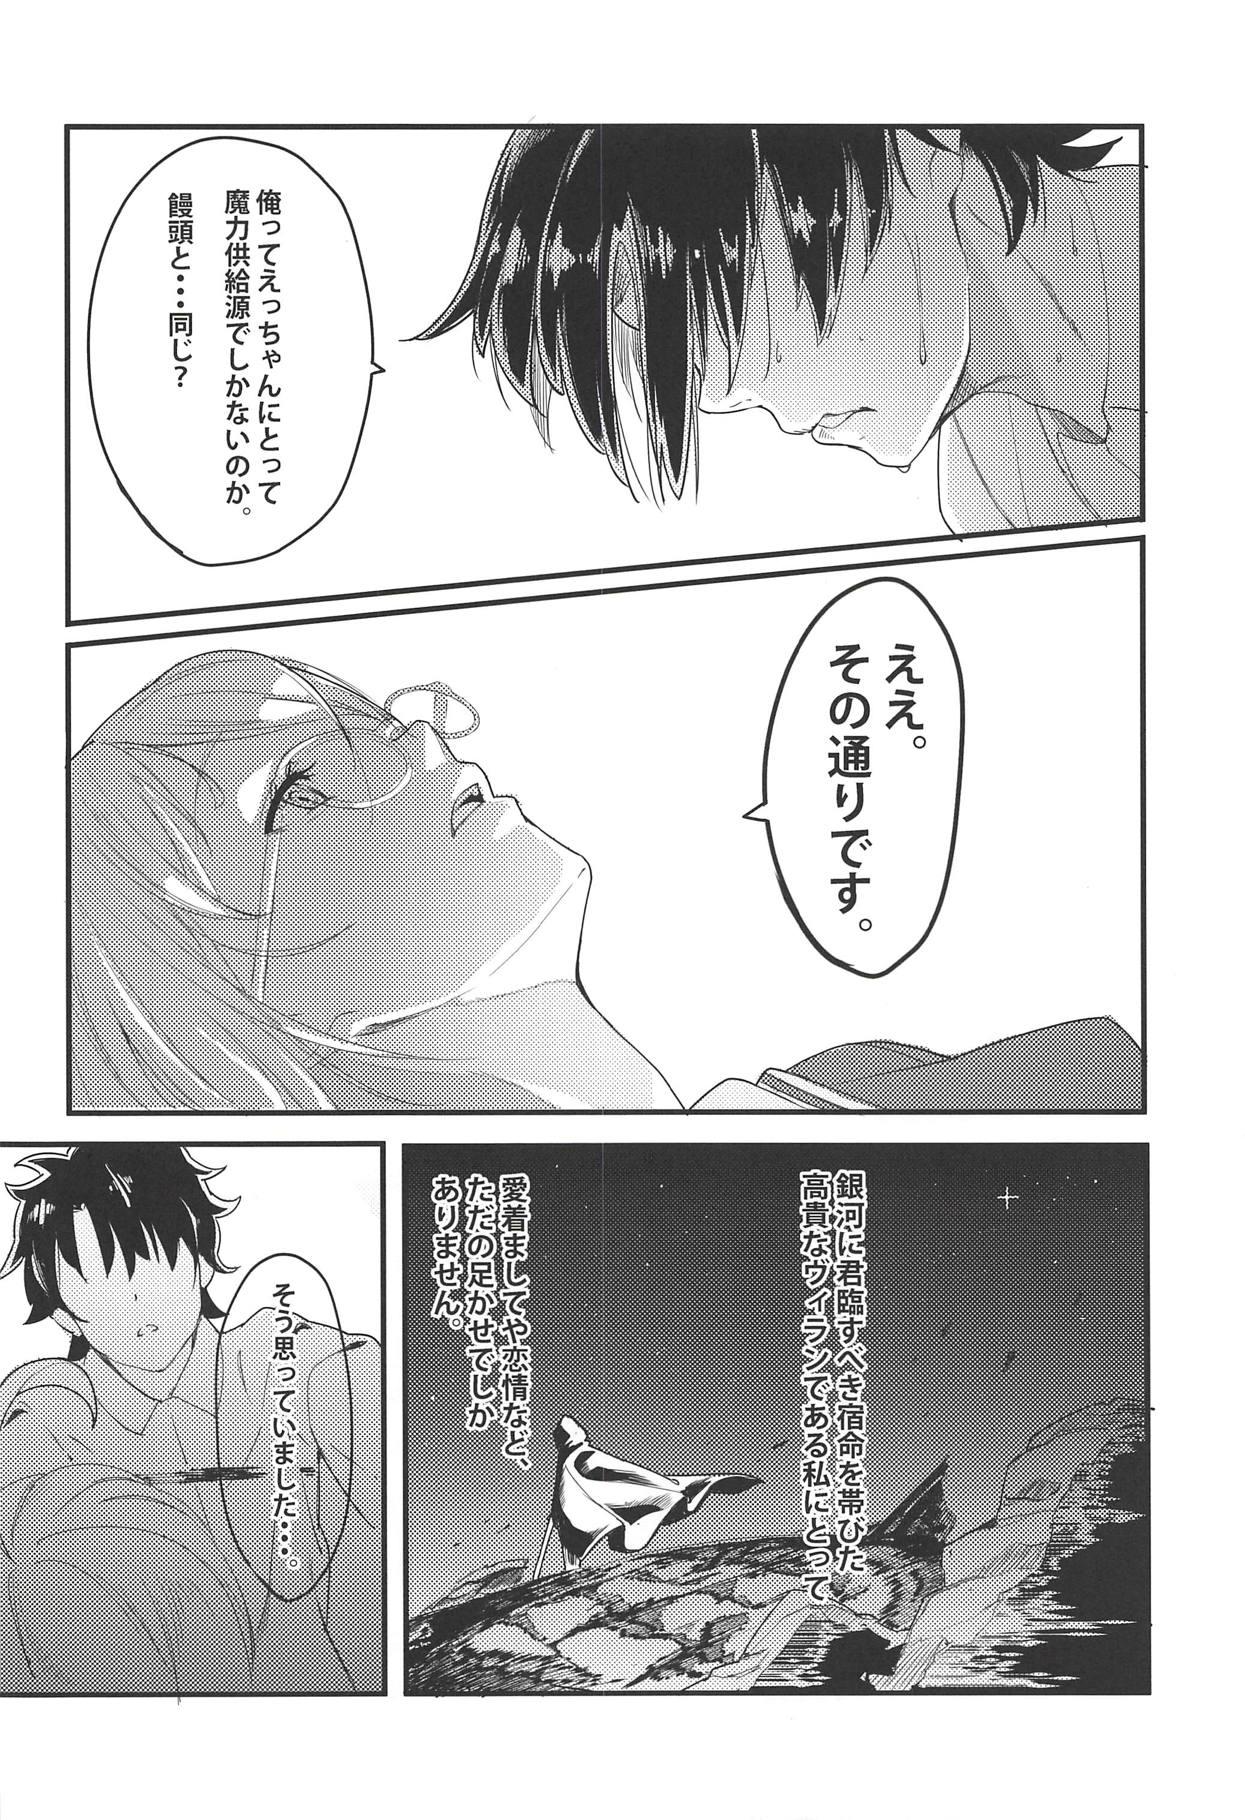 Fuck SOMEWHERE OUT IN SPACE - Fate grand order Bj - Page 7